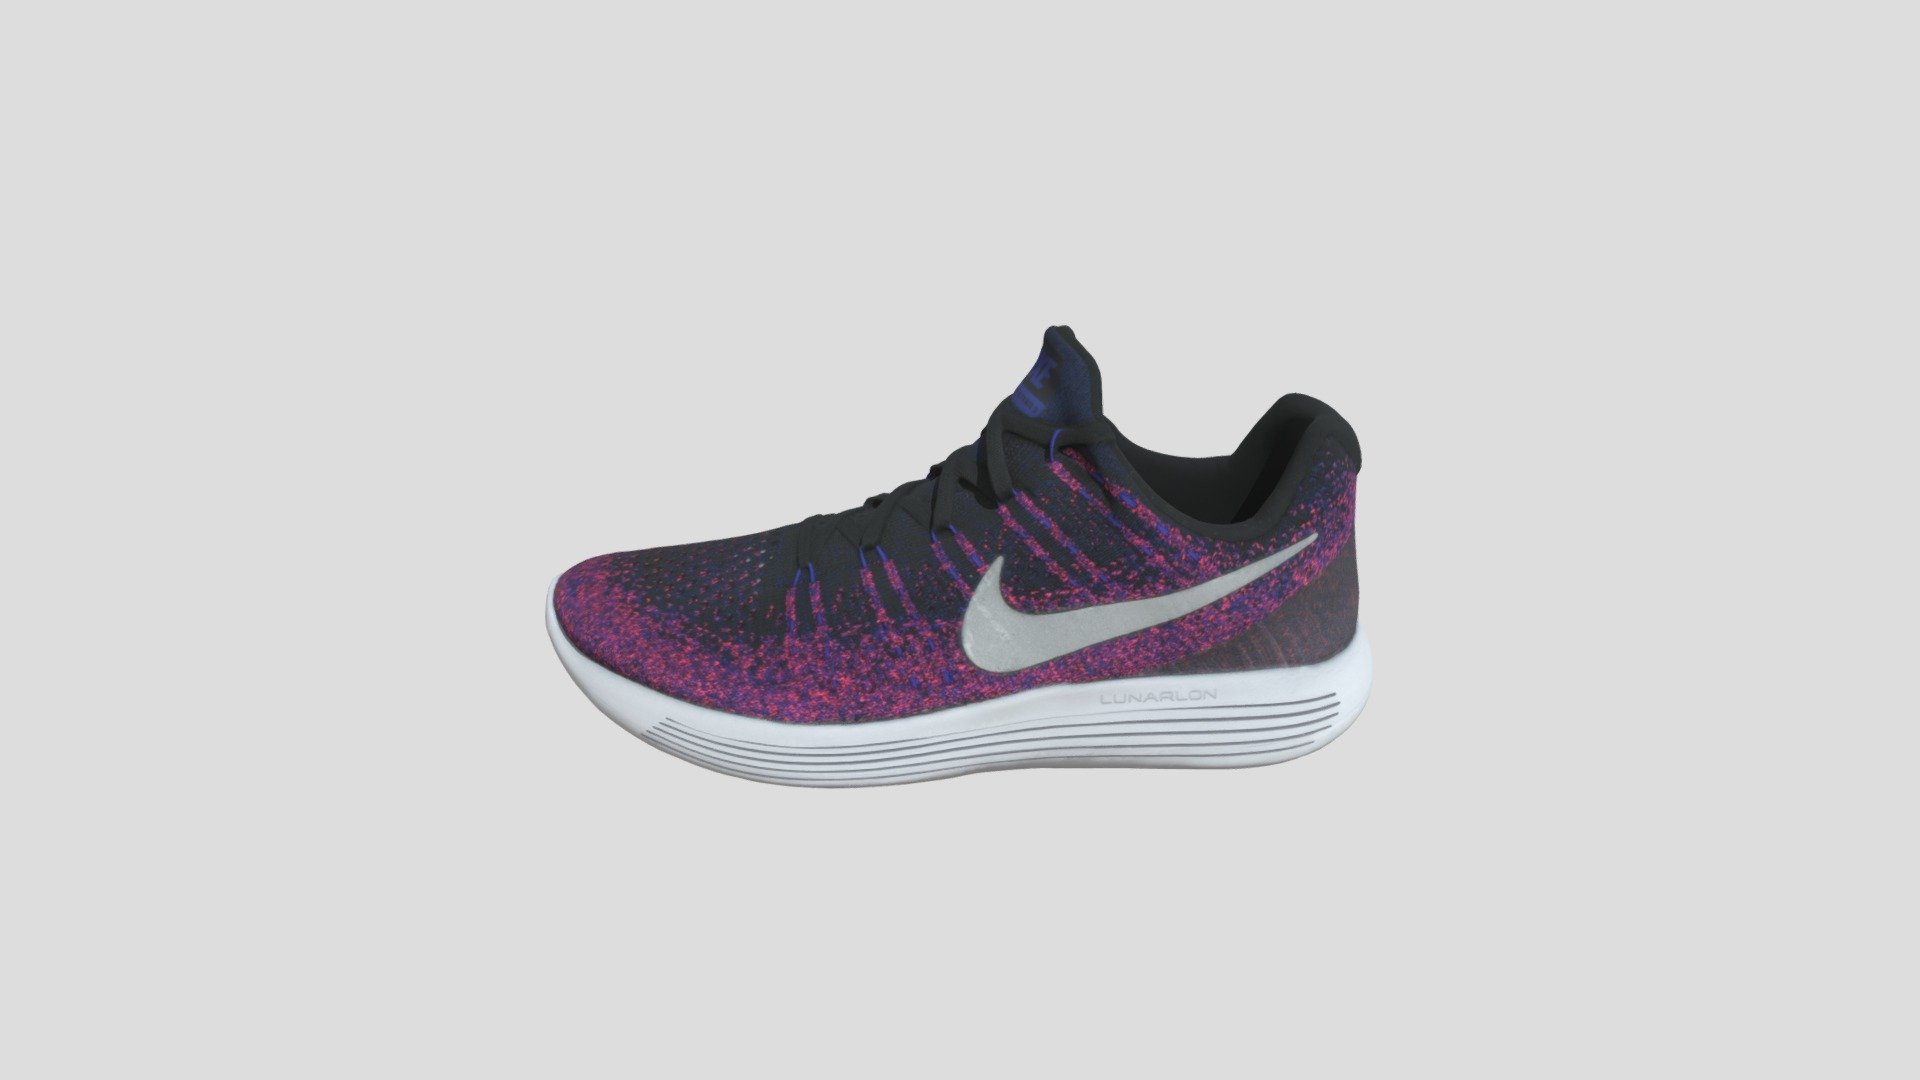 This model was created firstly by 3D scanning on retail version, and then being detail-improved manually, thus a 1:1 repulica of the original
PBR ready
Low-poly
4K texture
Welcome to check out other models we have to offer. And we do accept custom orders as well :) - Nike LUNAREPIC LOW FLYKNIT 2 登月_863779-015 - Buy Royalty Free 3D model by TRARGUS 3d model